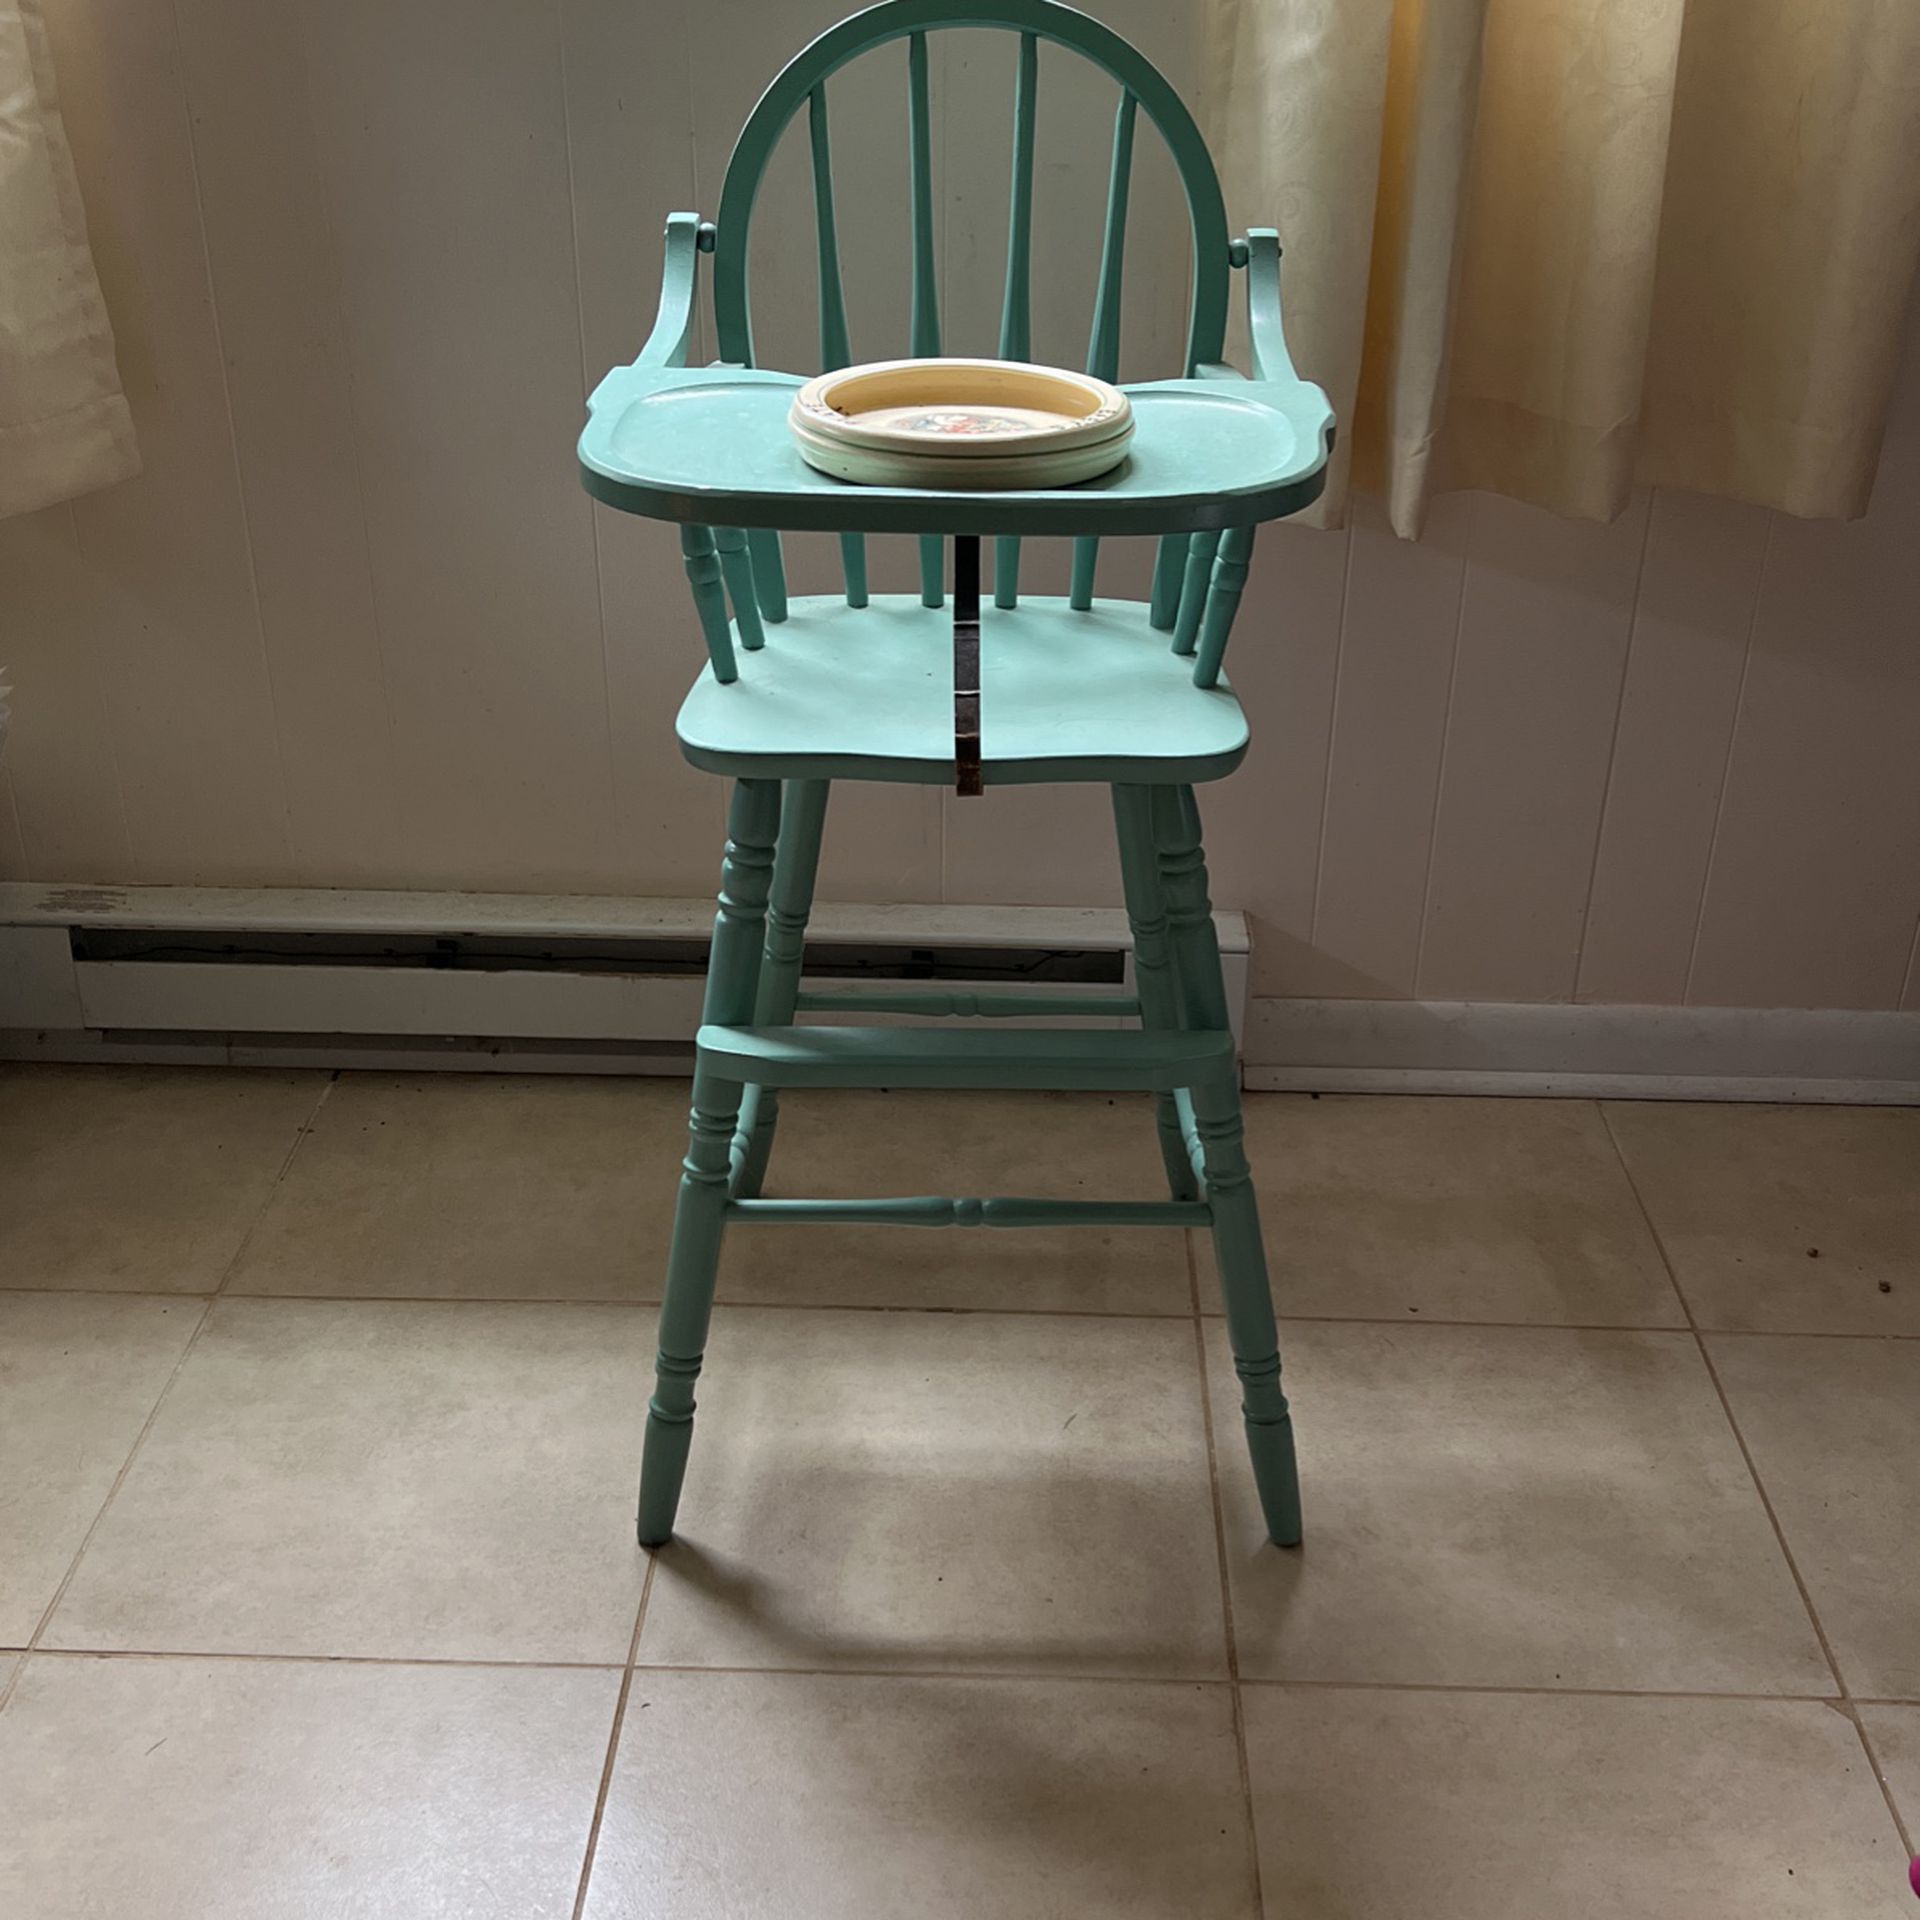 Antique Baby Chair And Plate. 